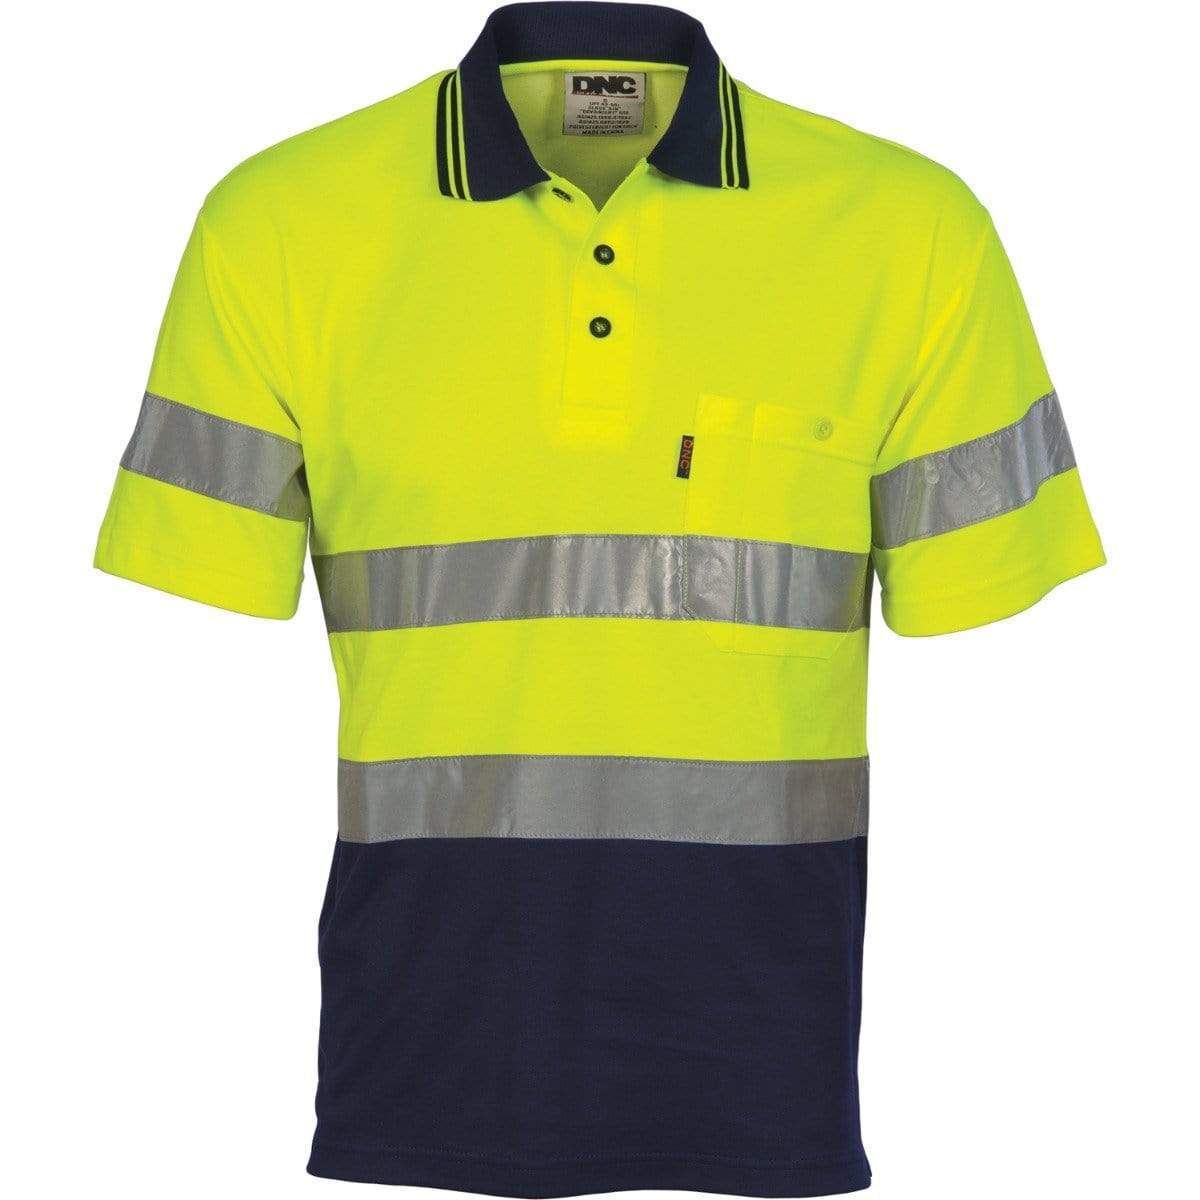 Dnc Workwear Hi-vis Two-tone Cotton Back Short Sleeve Polo With Generic Reflective Tape - 3717 Work Wear DNC Workwear Yellow/Navy XS 